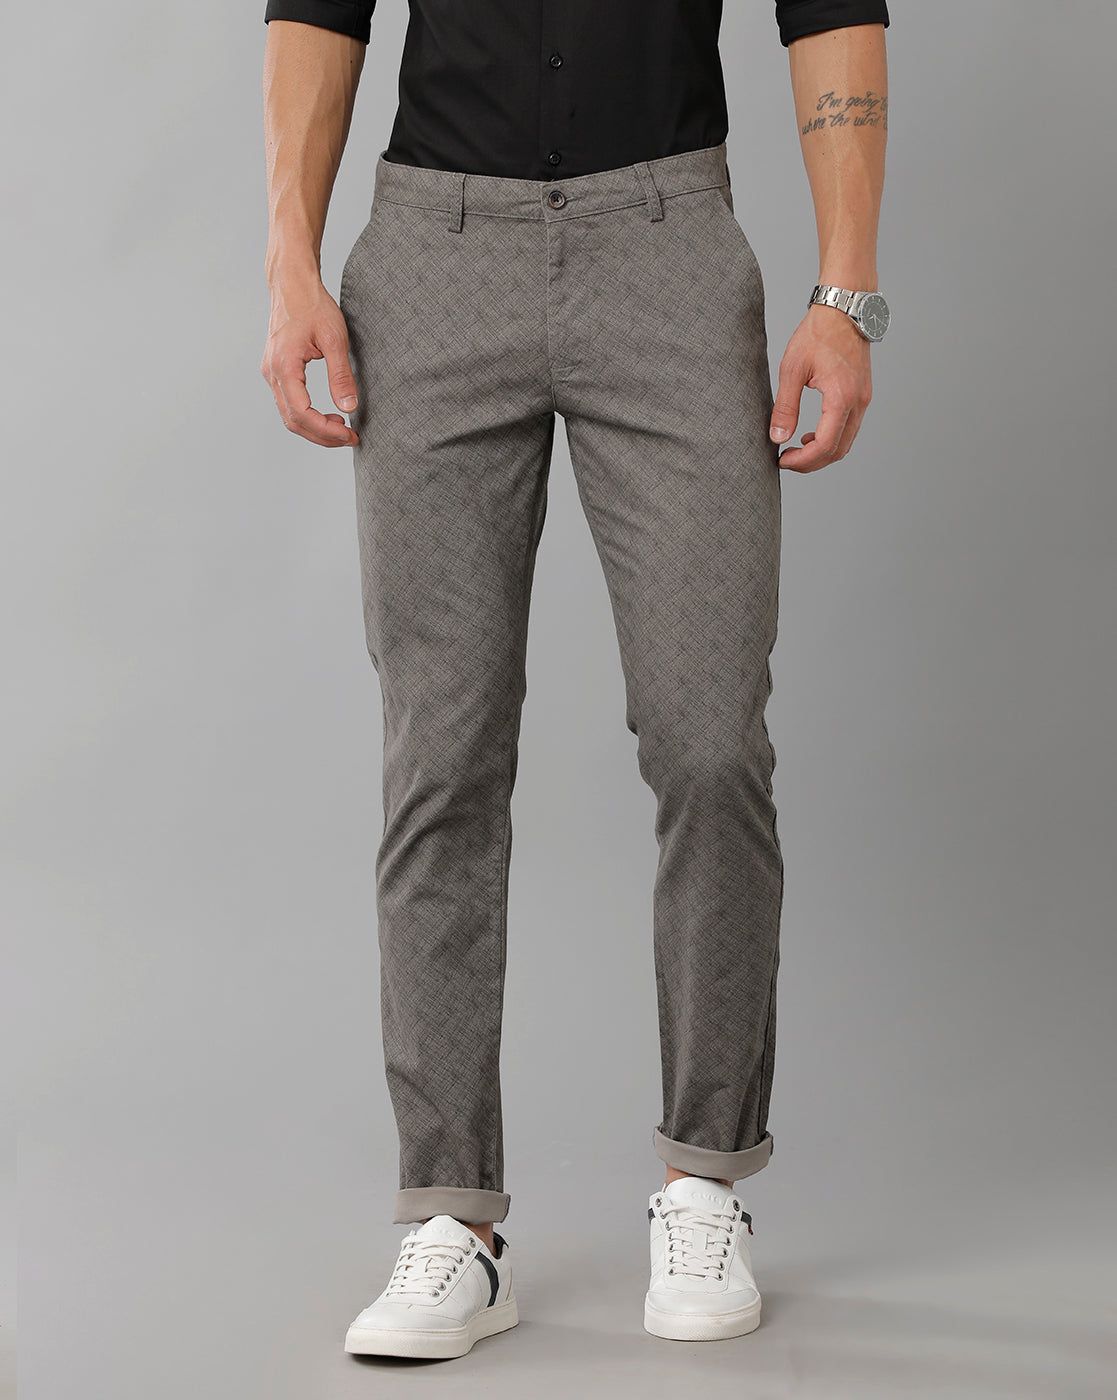 Classic Polo Casual Trousers  Buy Classic Polo Men Solid Cotton Slim Fit  Trousers Online  Nykaa Fashion